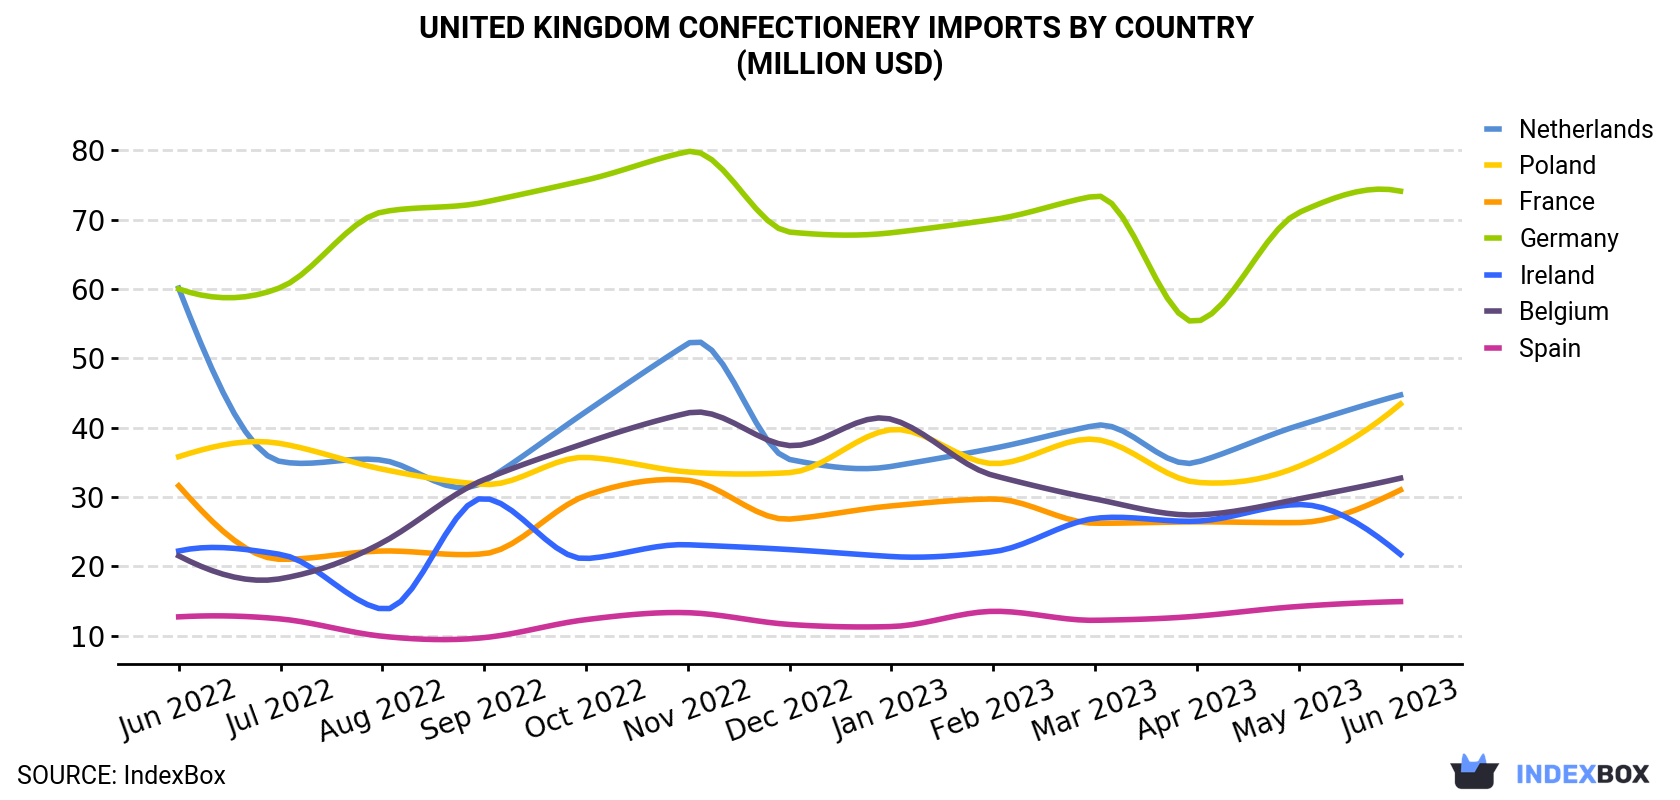 United Kingdom Confectionery Imports By Country (Million USD)